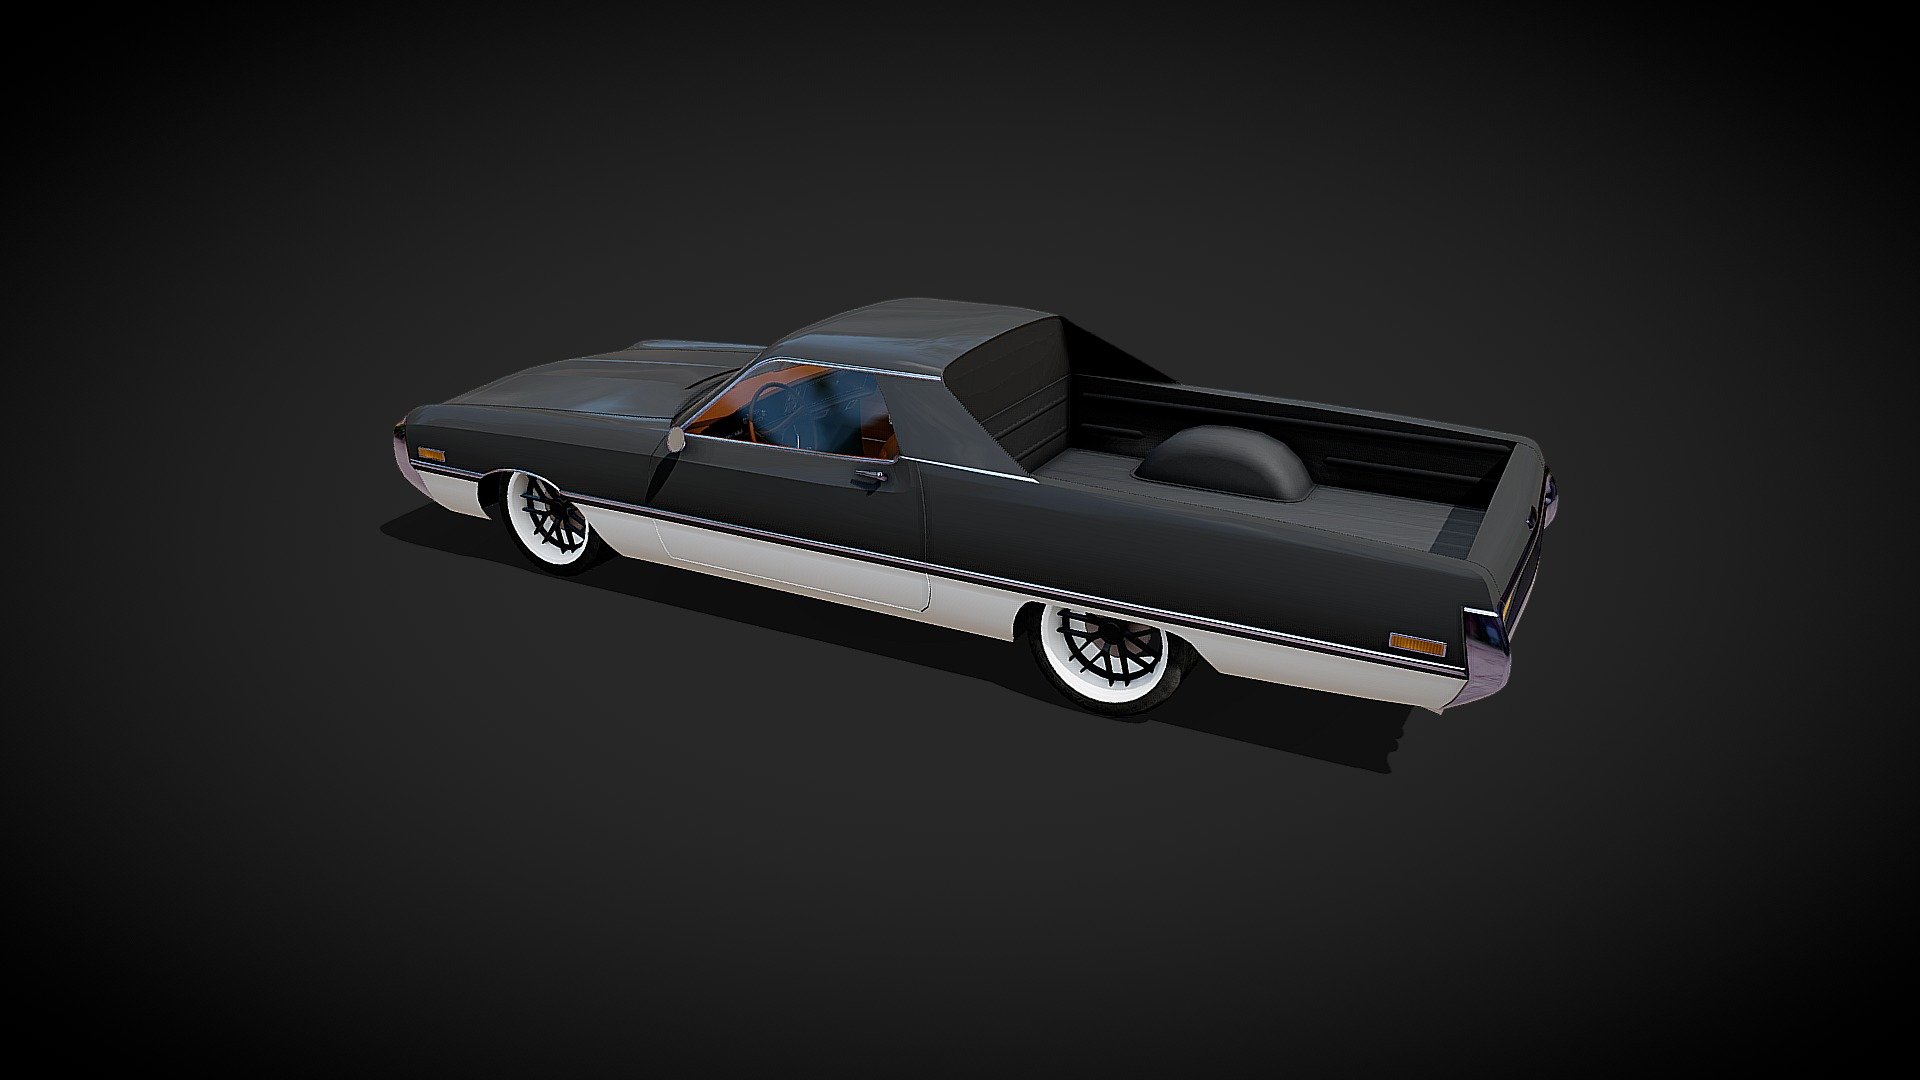 Fictional model of a pickup truck.Model scale Unity engine.PBR textures 3d model